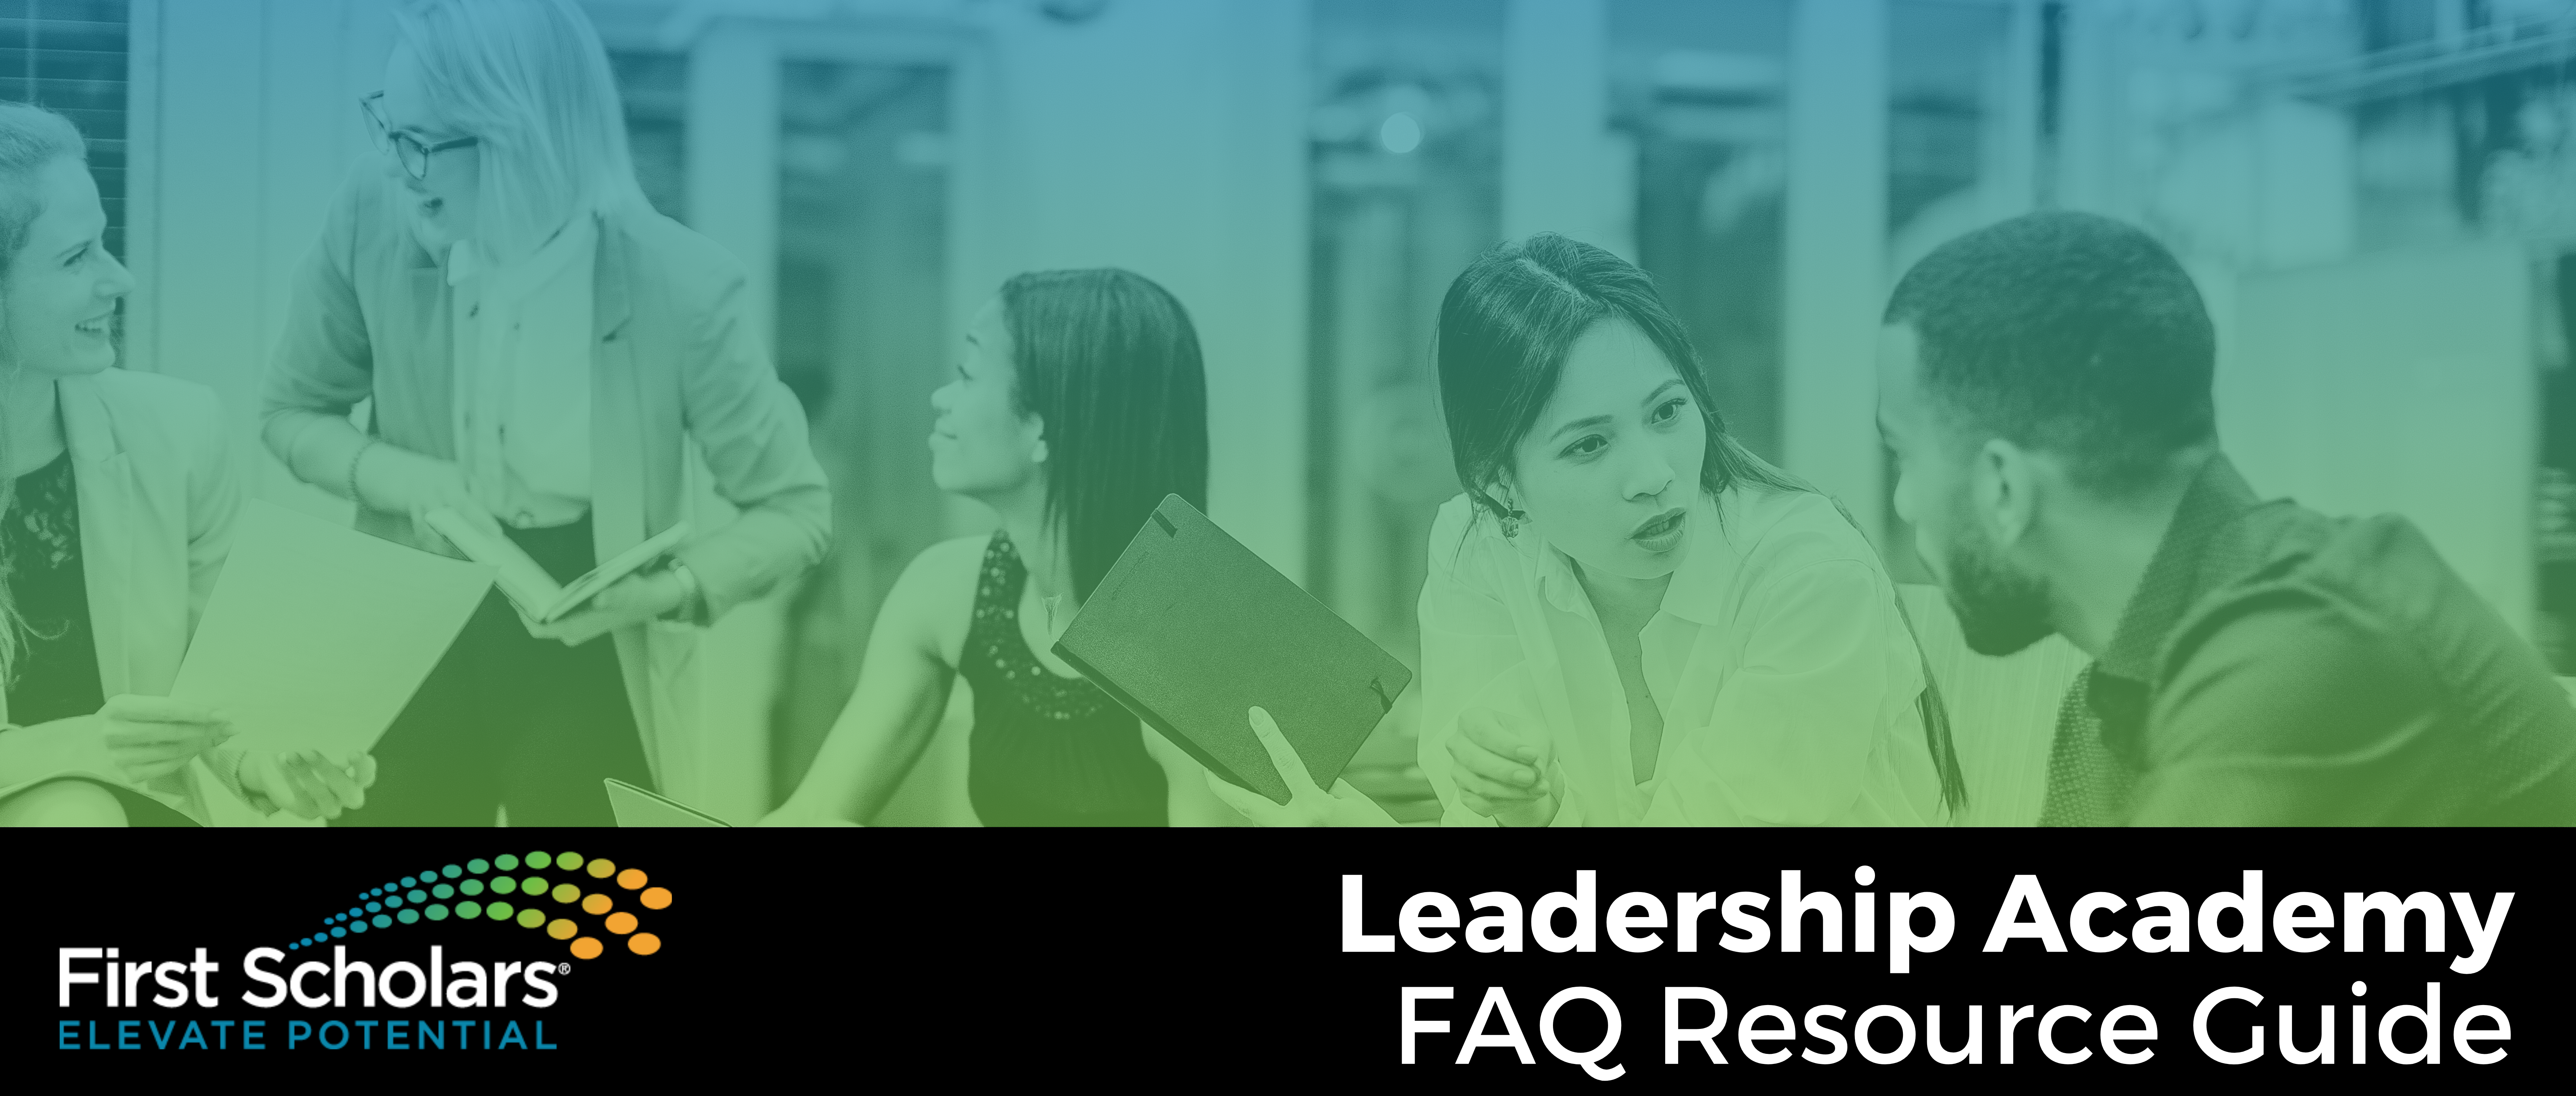 Leadership Academy FAQ Resource Guide Button to navigate to FAQ document